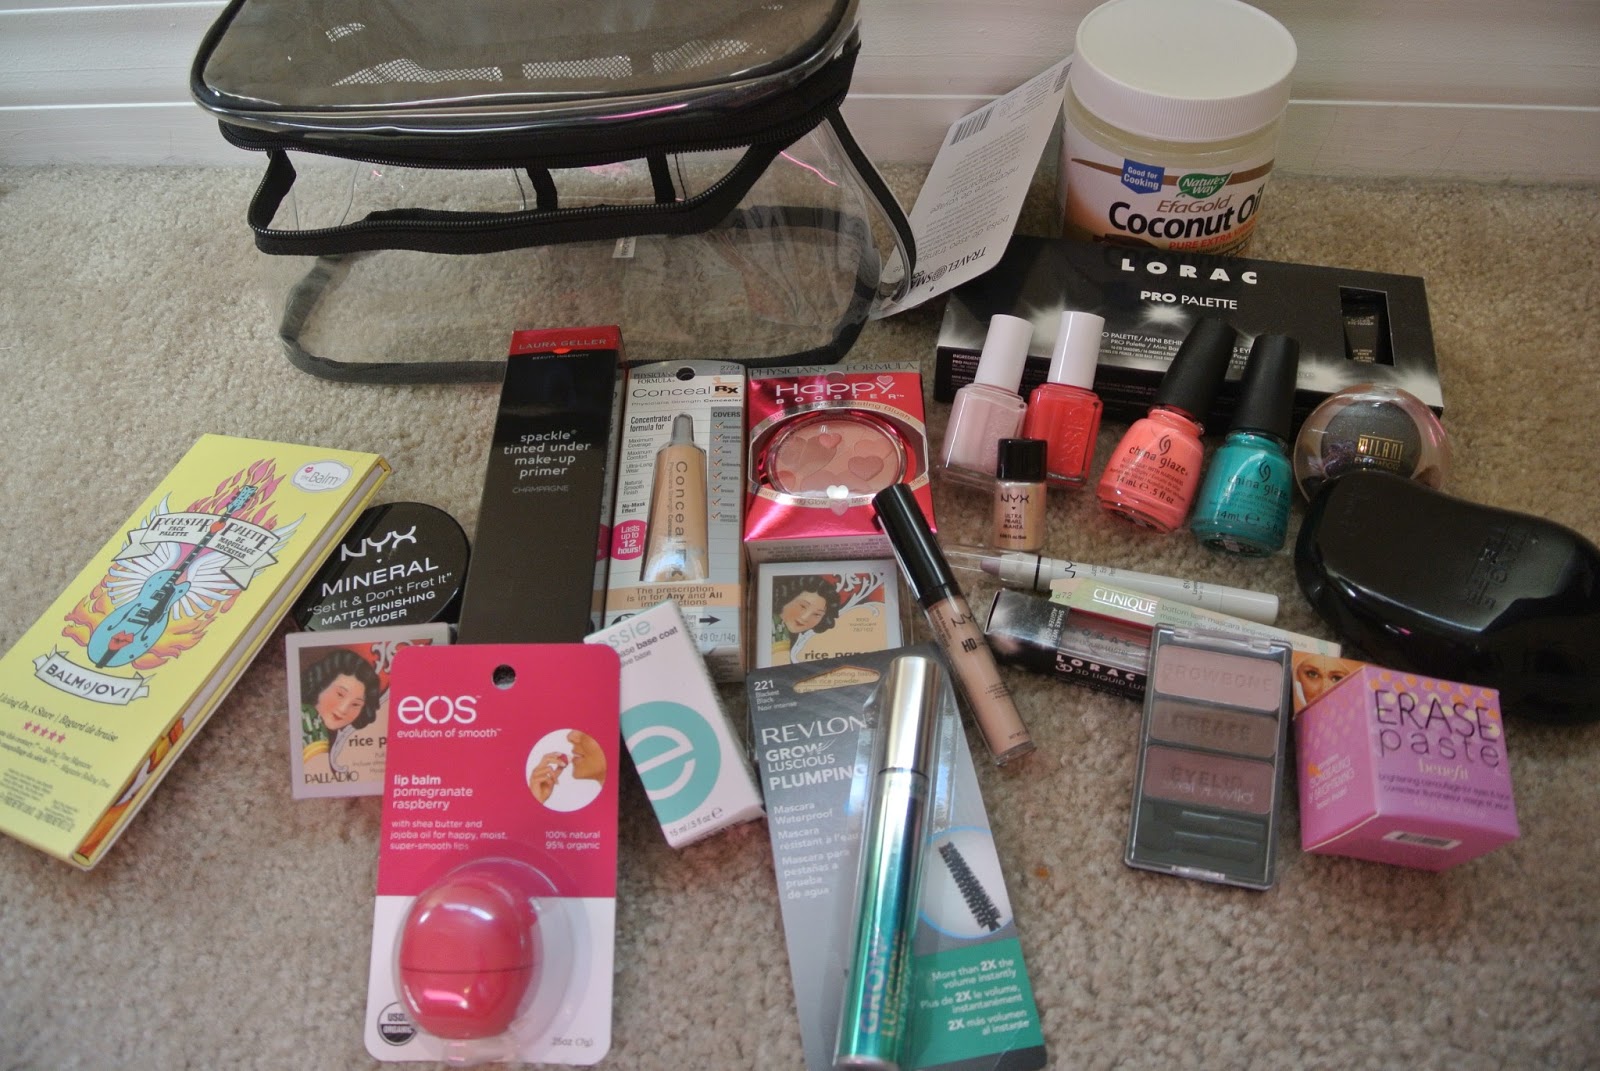 Books and Things Blog: HUGE Make-up Haul